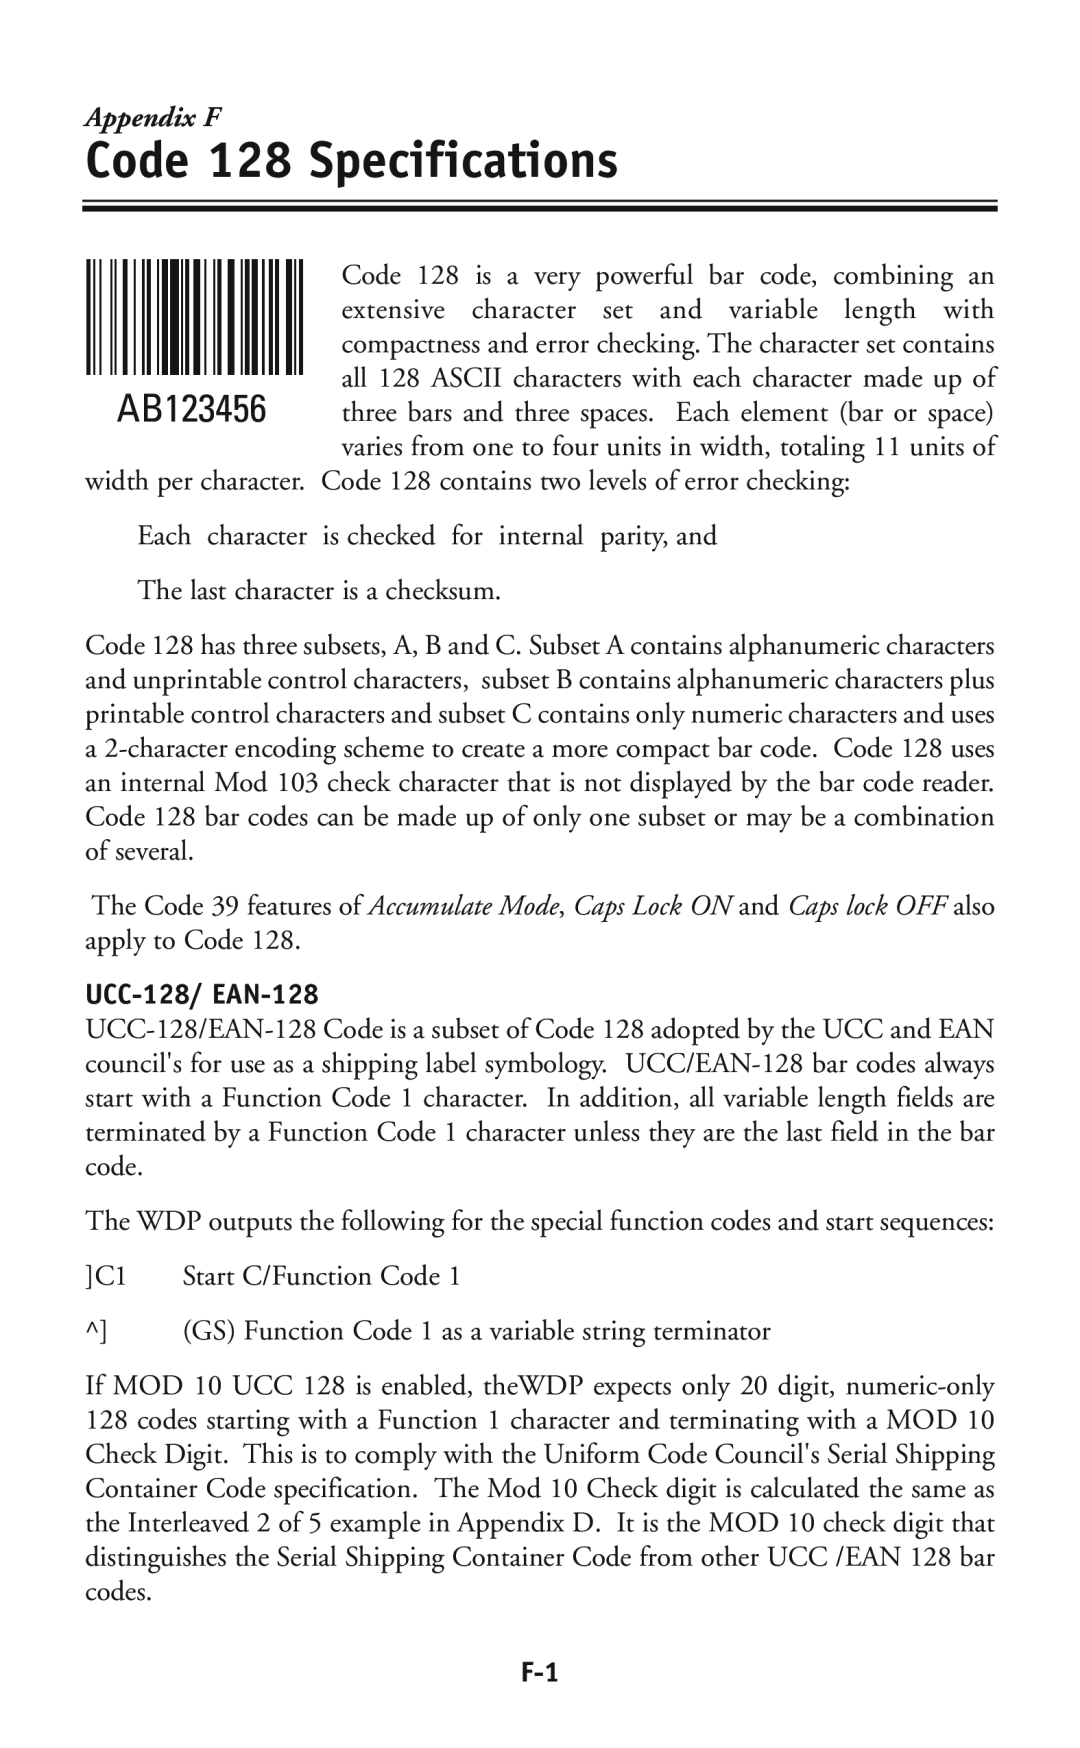 Worth Data P11/12 user manual Code 128 Specifications, Appendix F, UCC-128/ EAN-128 